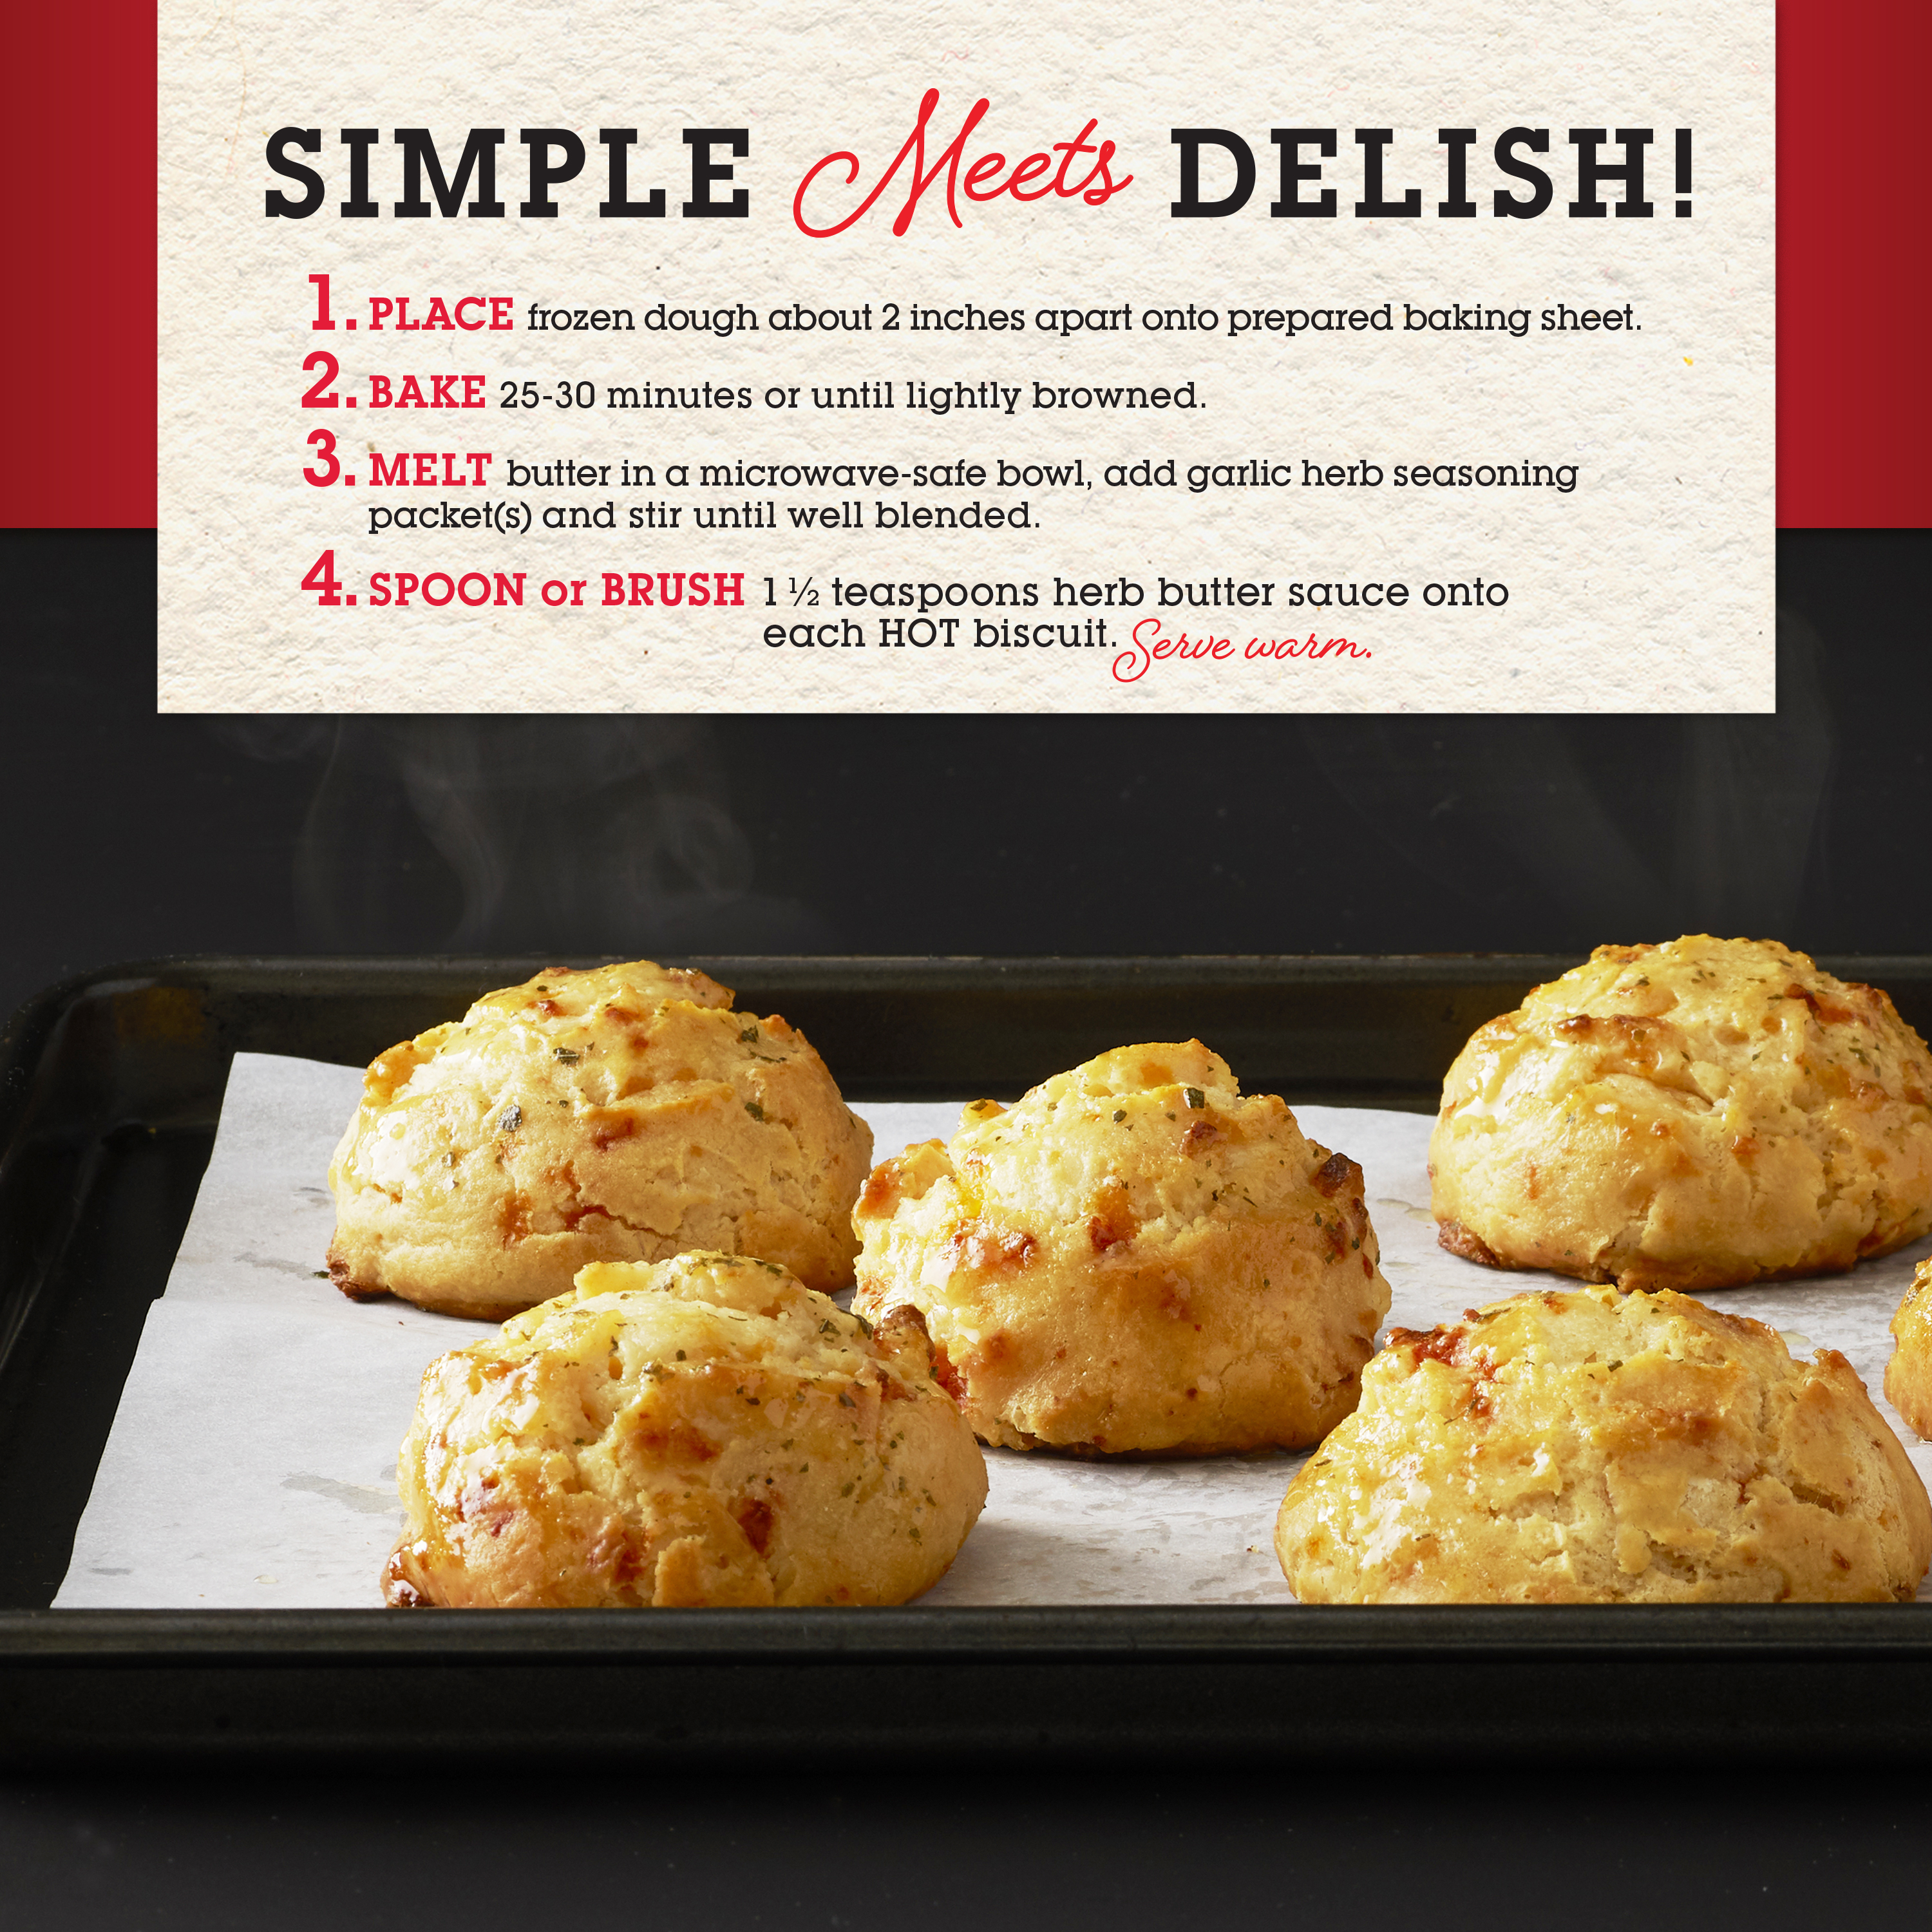 Red Lobster Cheddar Bay Frozen Biscuits, Ready to Bake, Makes 8 Biscuits, 15.66 oz Box - image 4 of 7